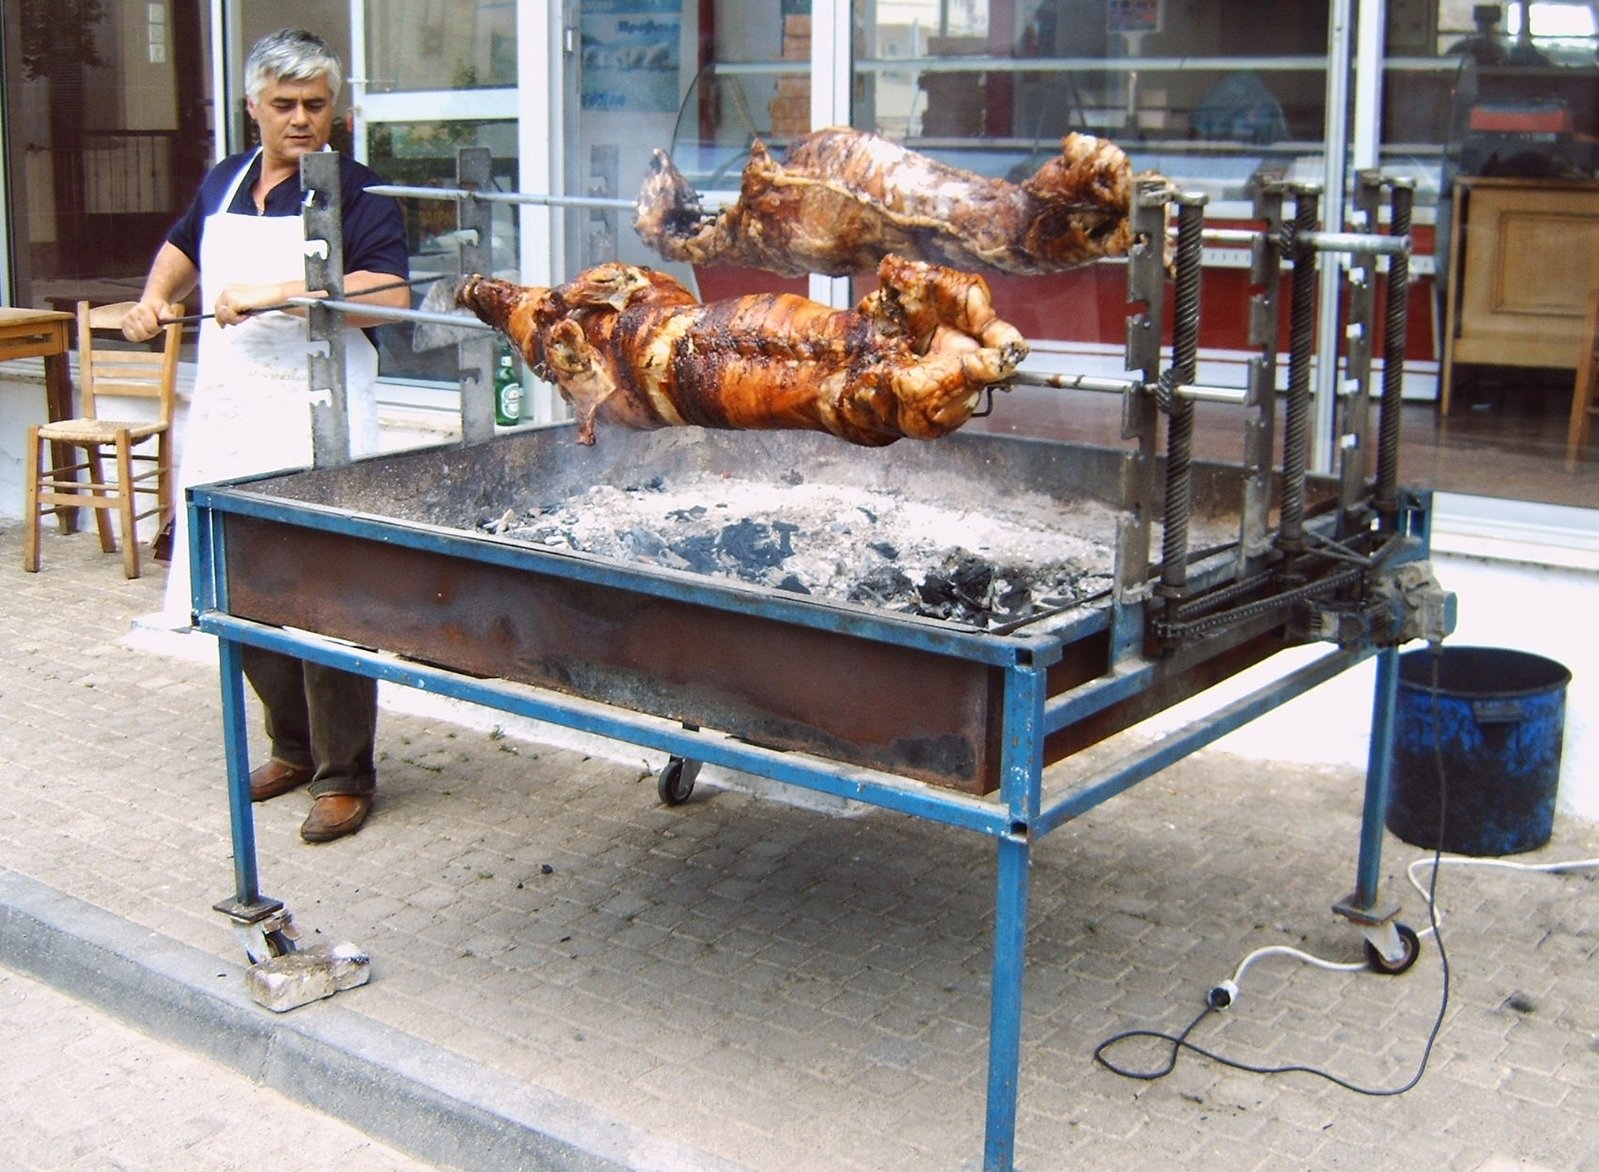 some large birds being prepared on an outdoor grill